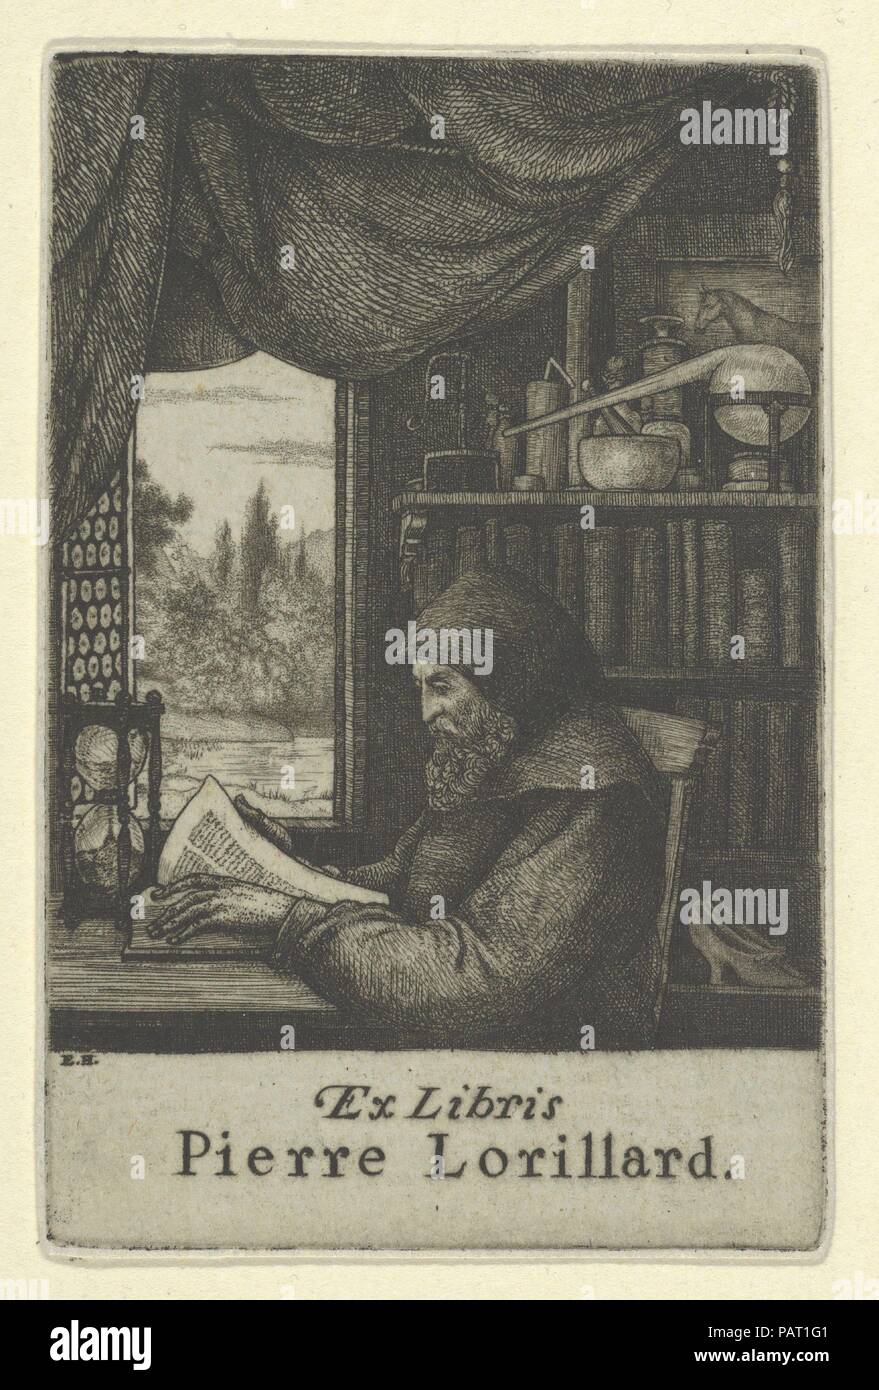 Ex Libris Pierre Lorillard. Artist: Ernest Haskell (American, Woodstock, Connecticut 1876-1925 West Point, Maine). Dimensions: Sheet (Trimmed): 3 9/16 × 2 3/8 in. (9.1 × 6.1 cm). Date: 1900-1925.  Bookplate for Pierre Lorillard. Museum: Metropolitan Museum of Art, New York, USA. Stock Photo